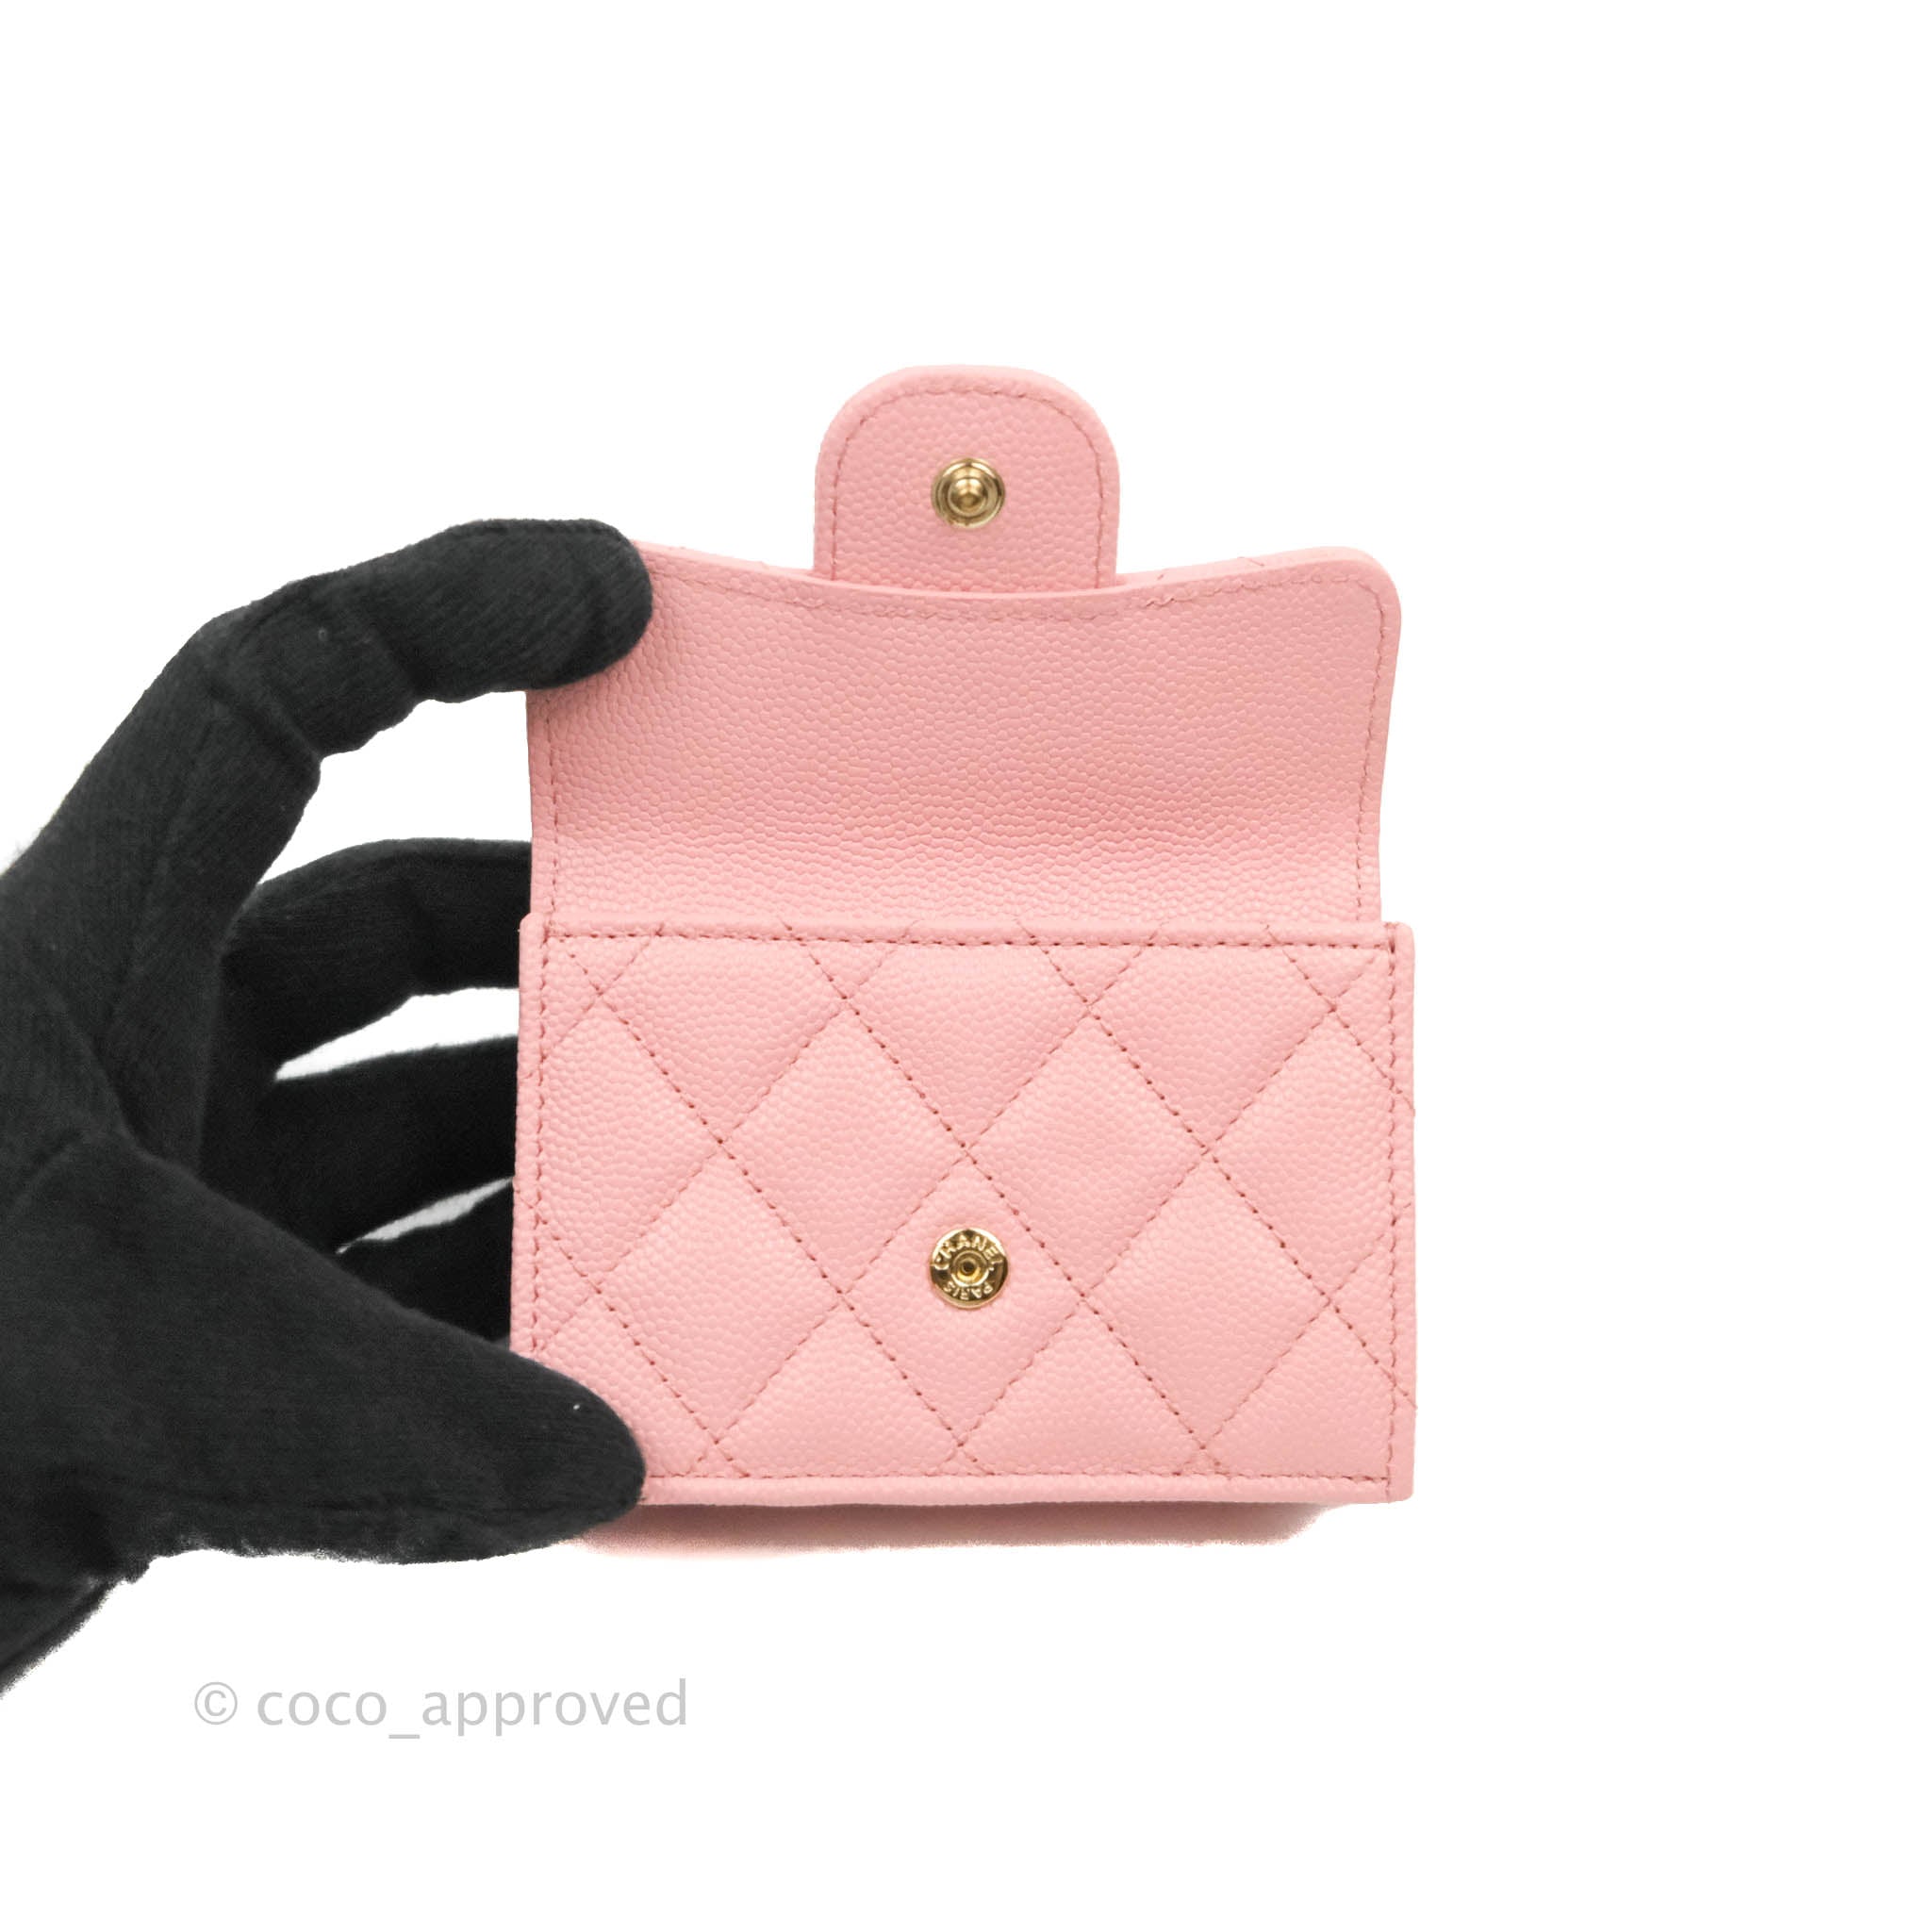 CHANEL Caviar Chevron Quilted Compact Flap Wallet Pink 418676